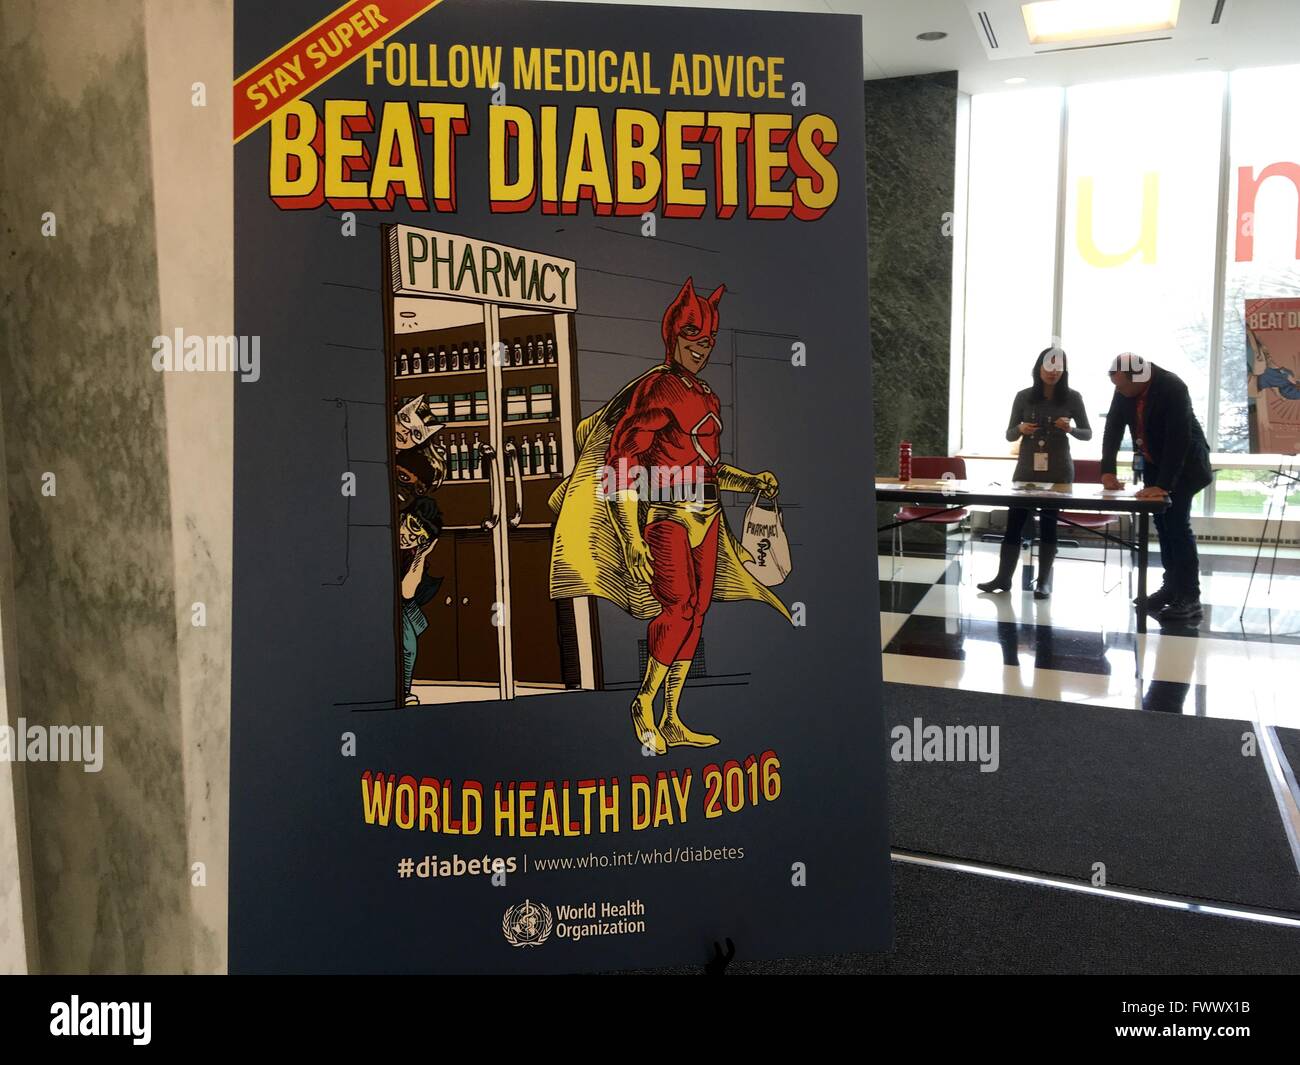 New York, USA. 7th Apr, 2016. A poster reads 'Follow Medical Advice Beat Diabetes' is seen at the United Nations headquarters in New York, on April 7, 2016, World Health Day. UN Secretary-General Ban Ki-moon on Thursday said that diabetes now causes some 1.5 million deaths a year and called for healthier lifestyles on this year's World Health Day. © Li Muzi/Xinhua/Alamy Live News Stock Photo